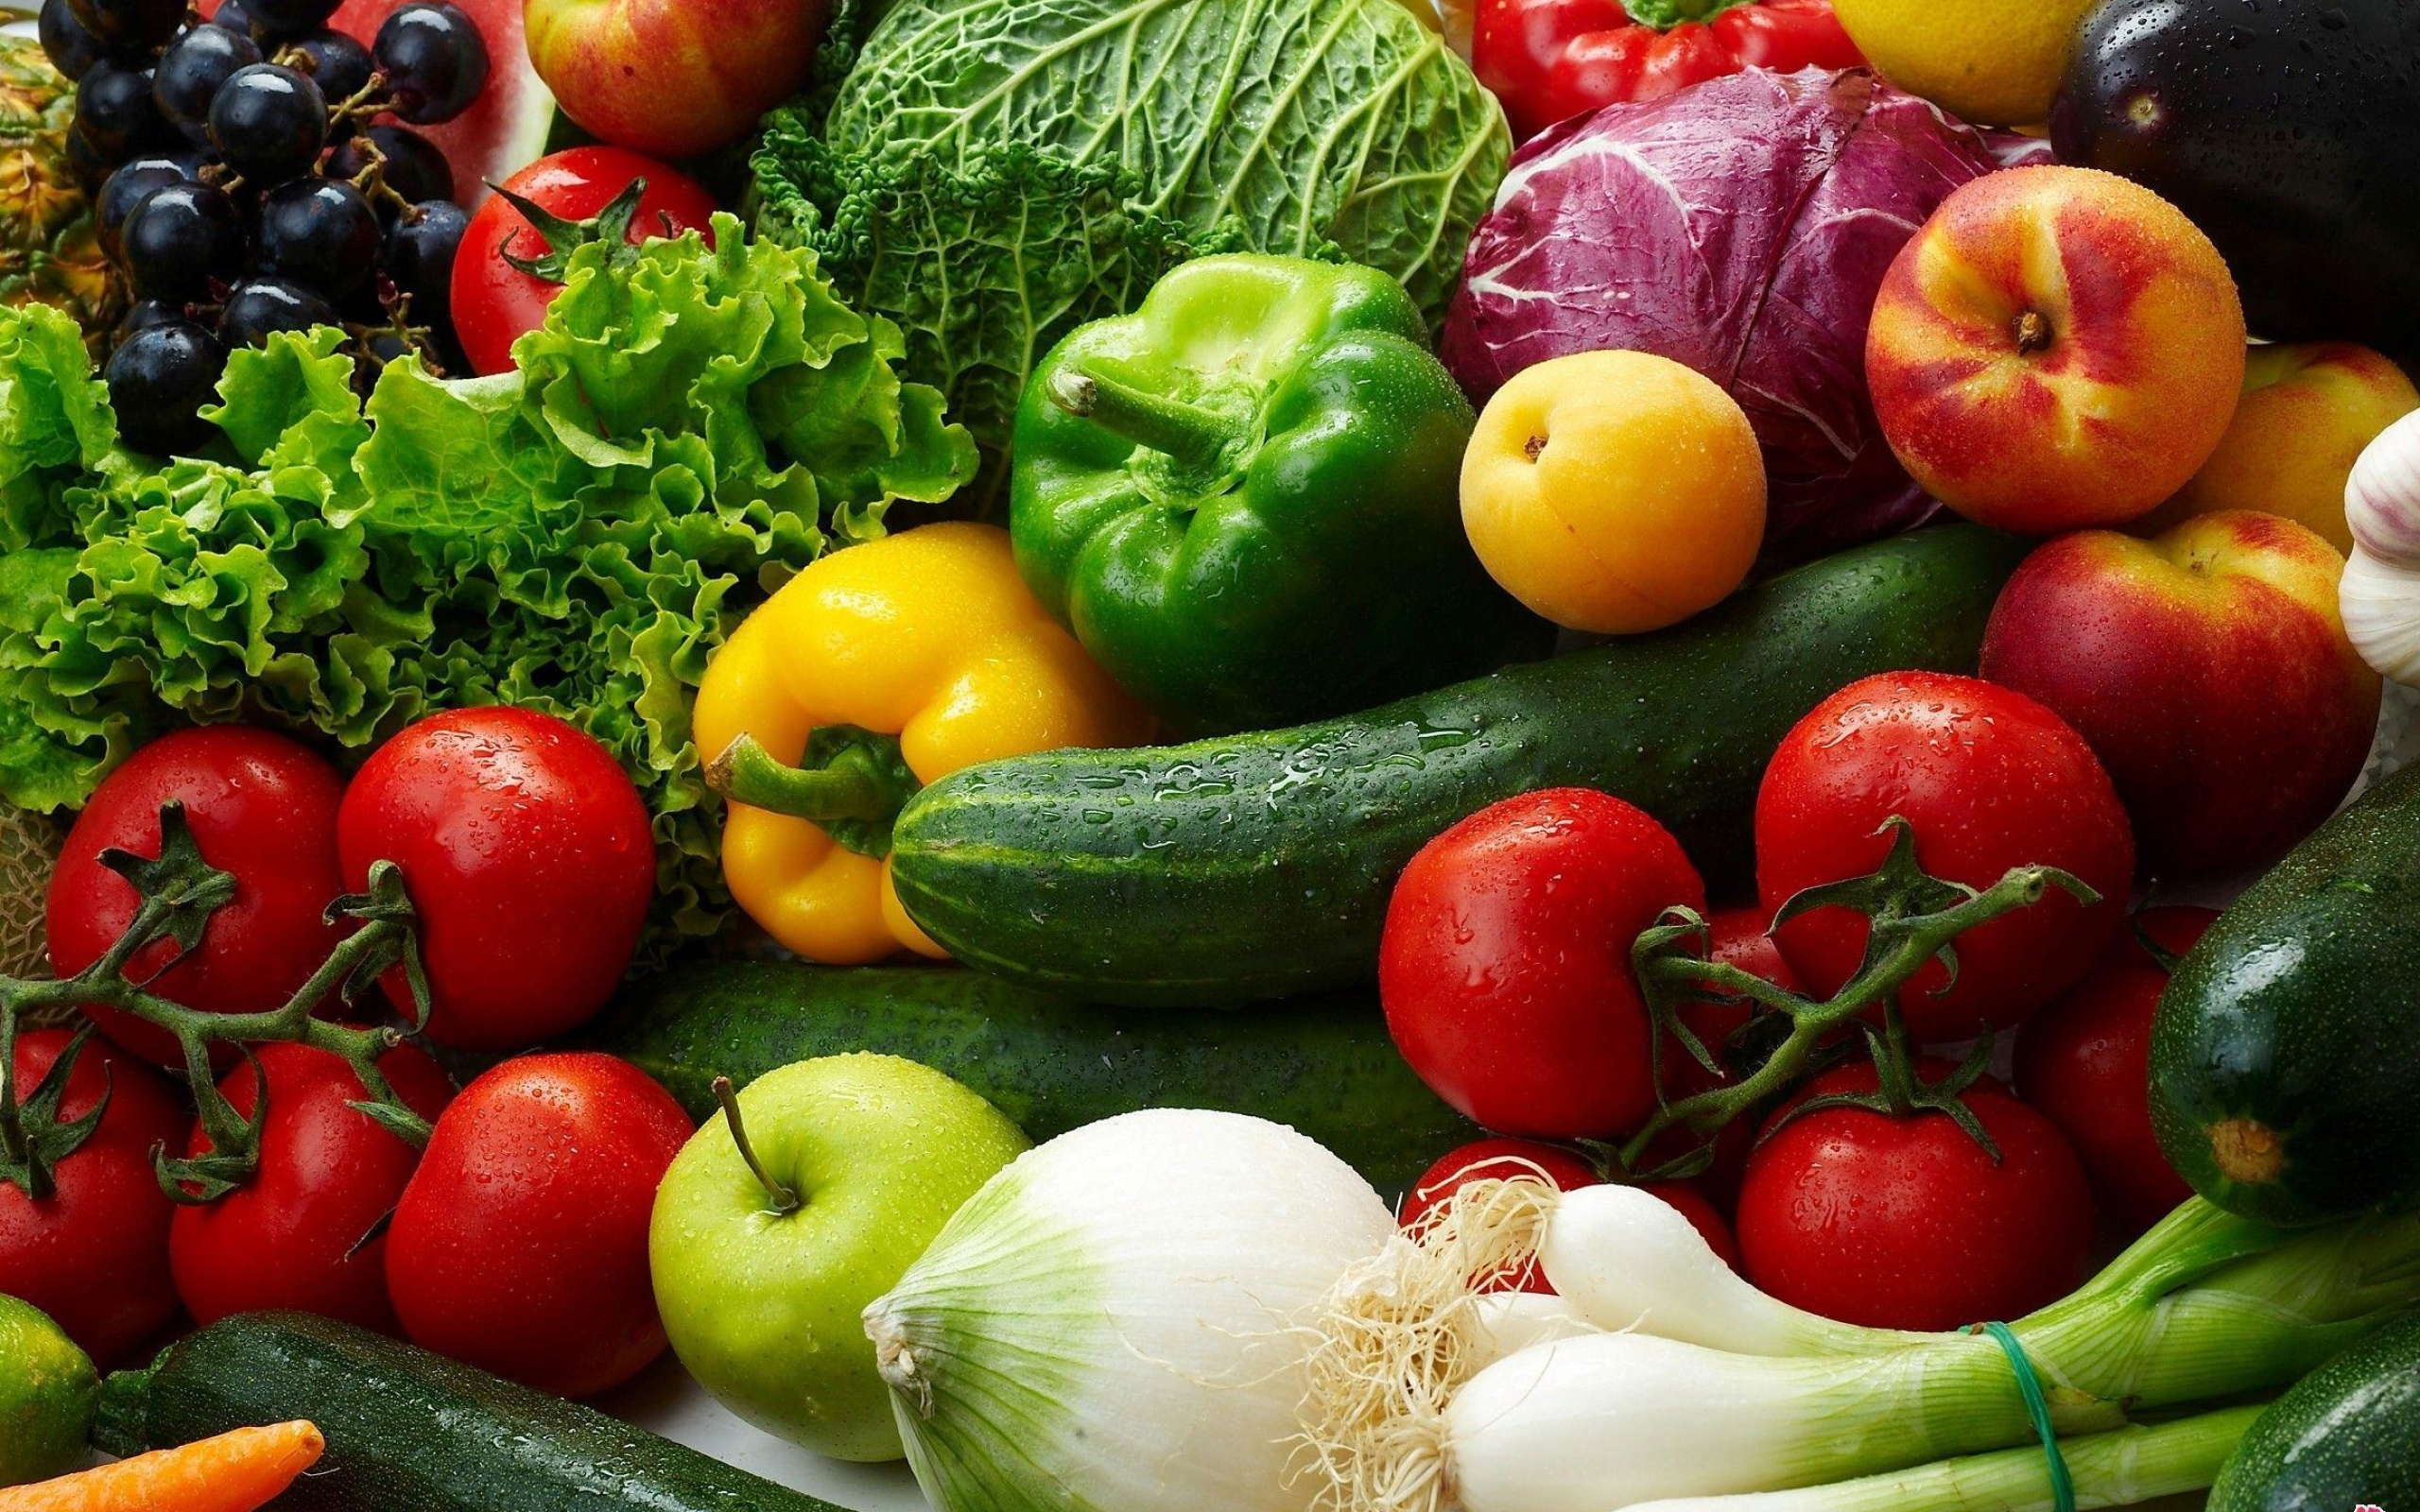 Vegetables: Plants used for food, Roots, stems and leaves. 2560x1600 HD Wallpaper.